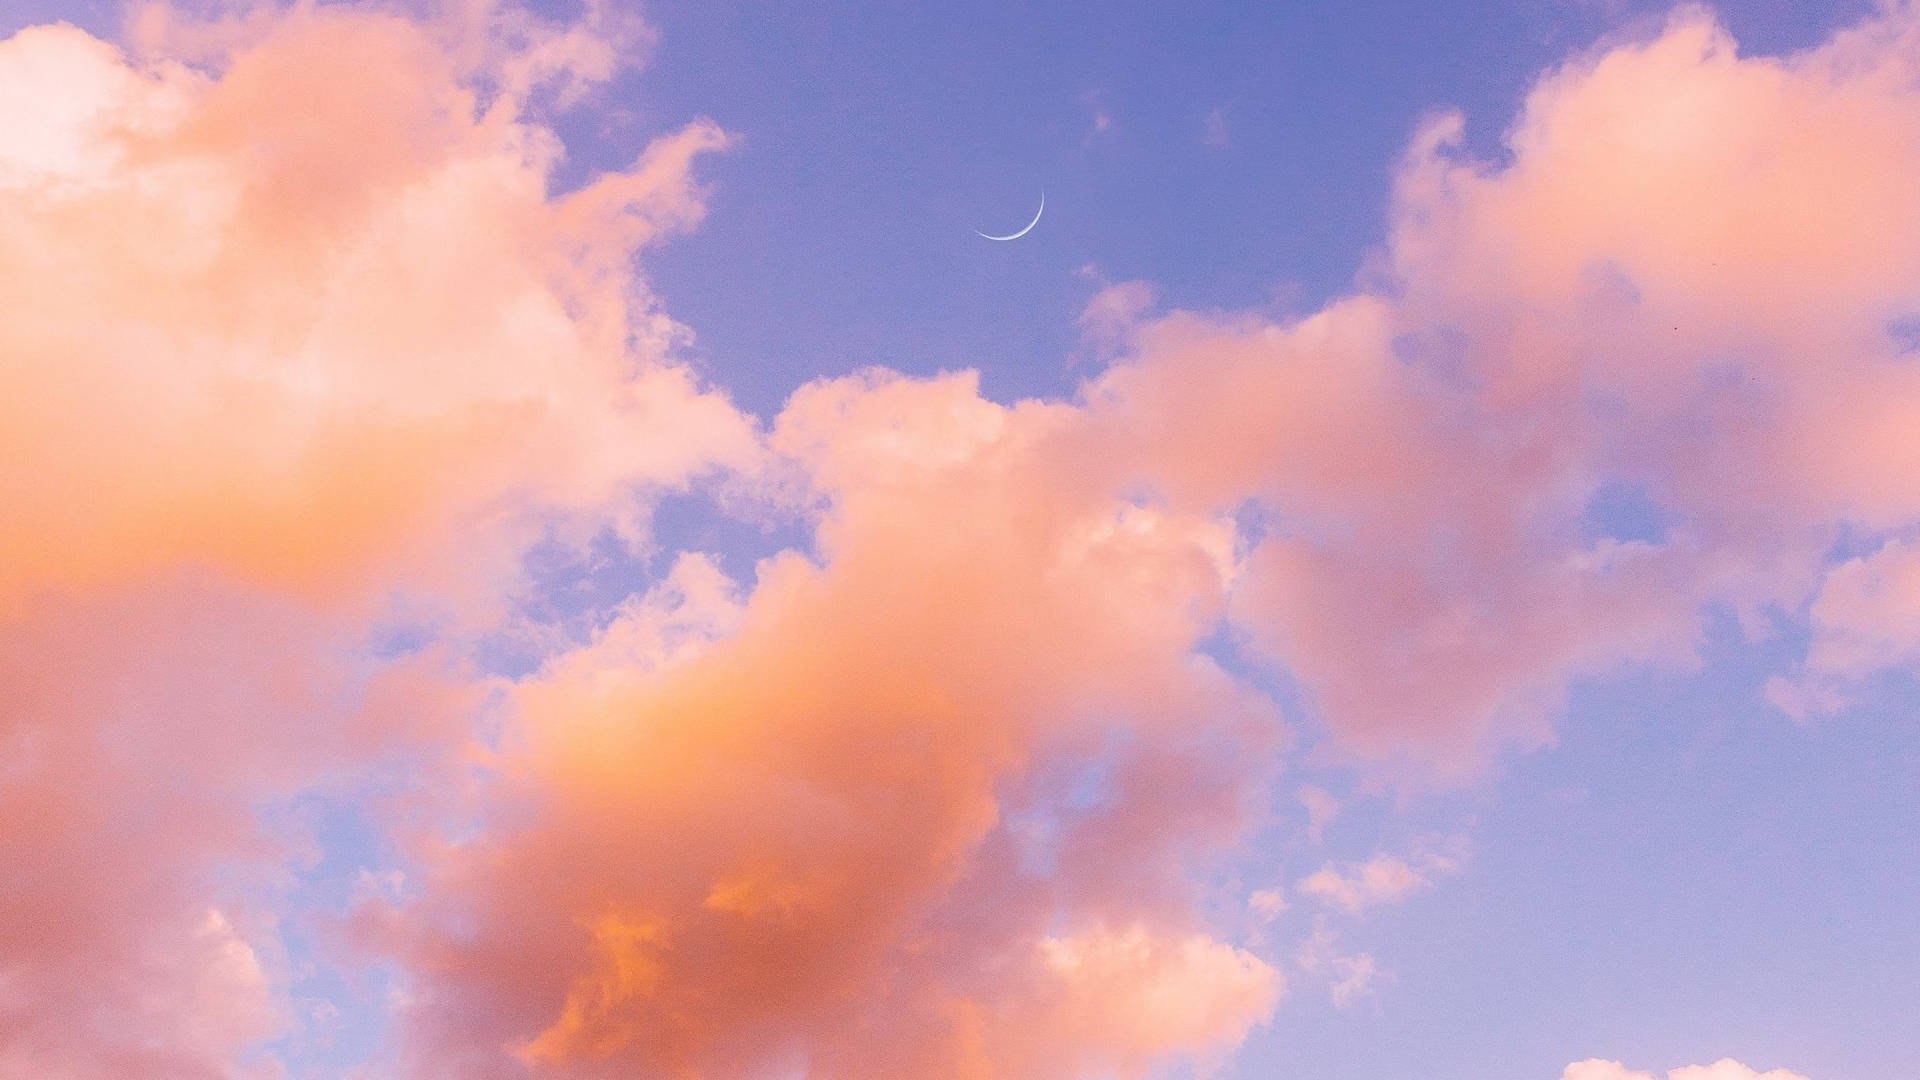 Moon Over The Aesthetic Cloud Wallpaper